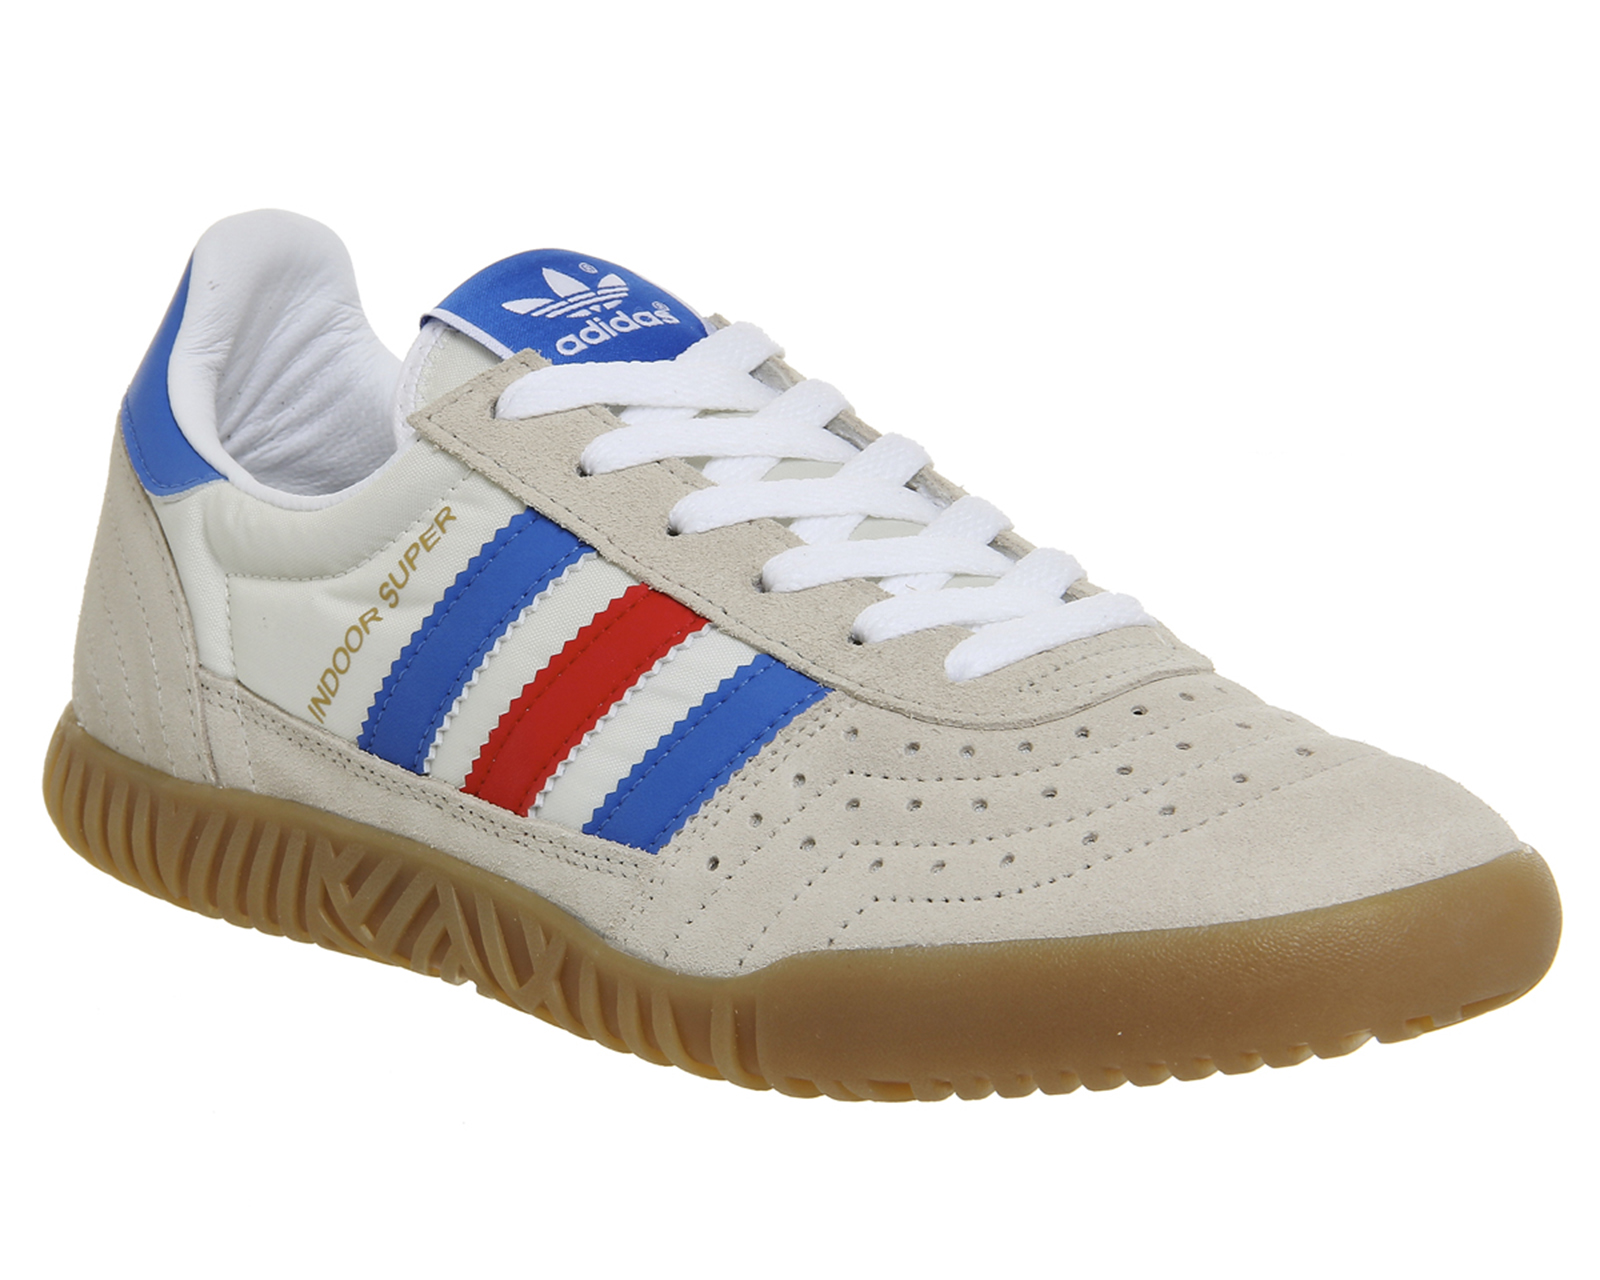 adidas Indoor Super Spezial Chalk White Bright Royal - His trainers